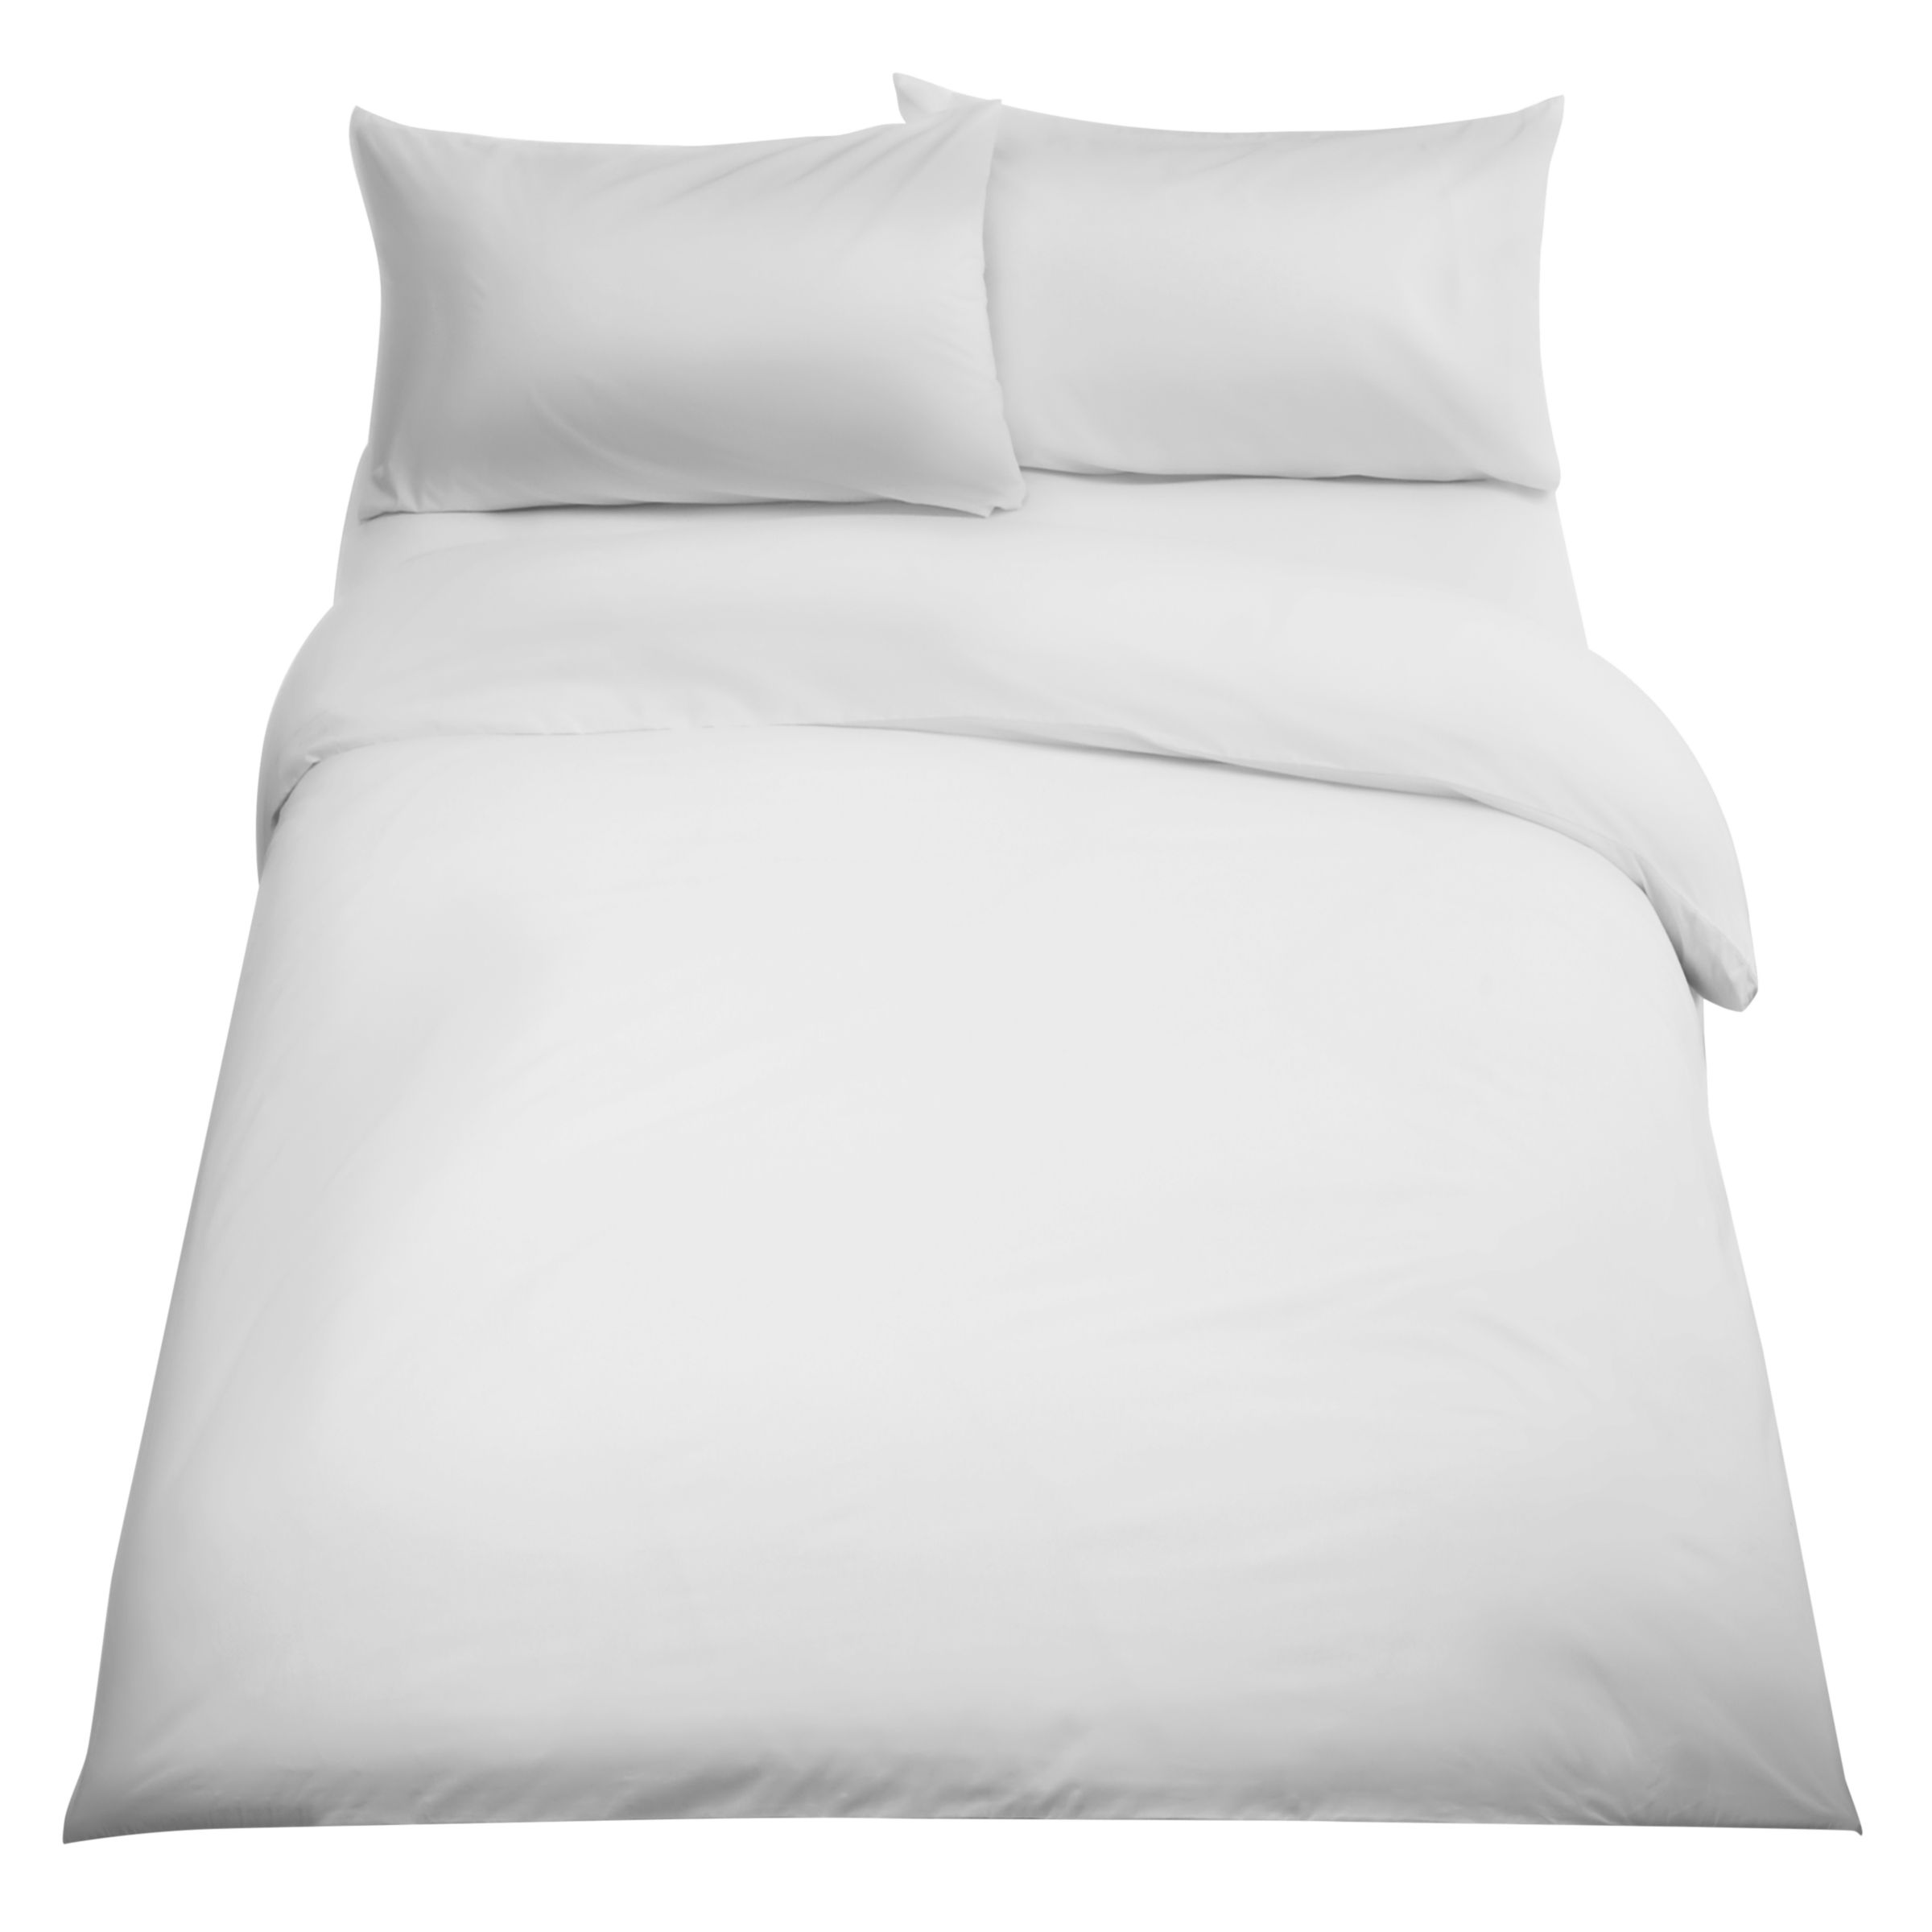 John Lewis Soft & Silky Specialist Temperature Balancing 400 Thread Count Super King Duvet Cover, White